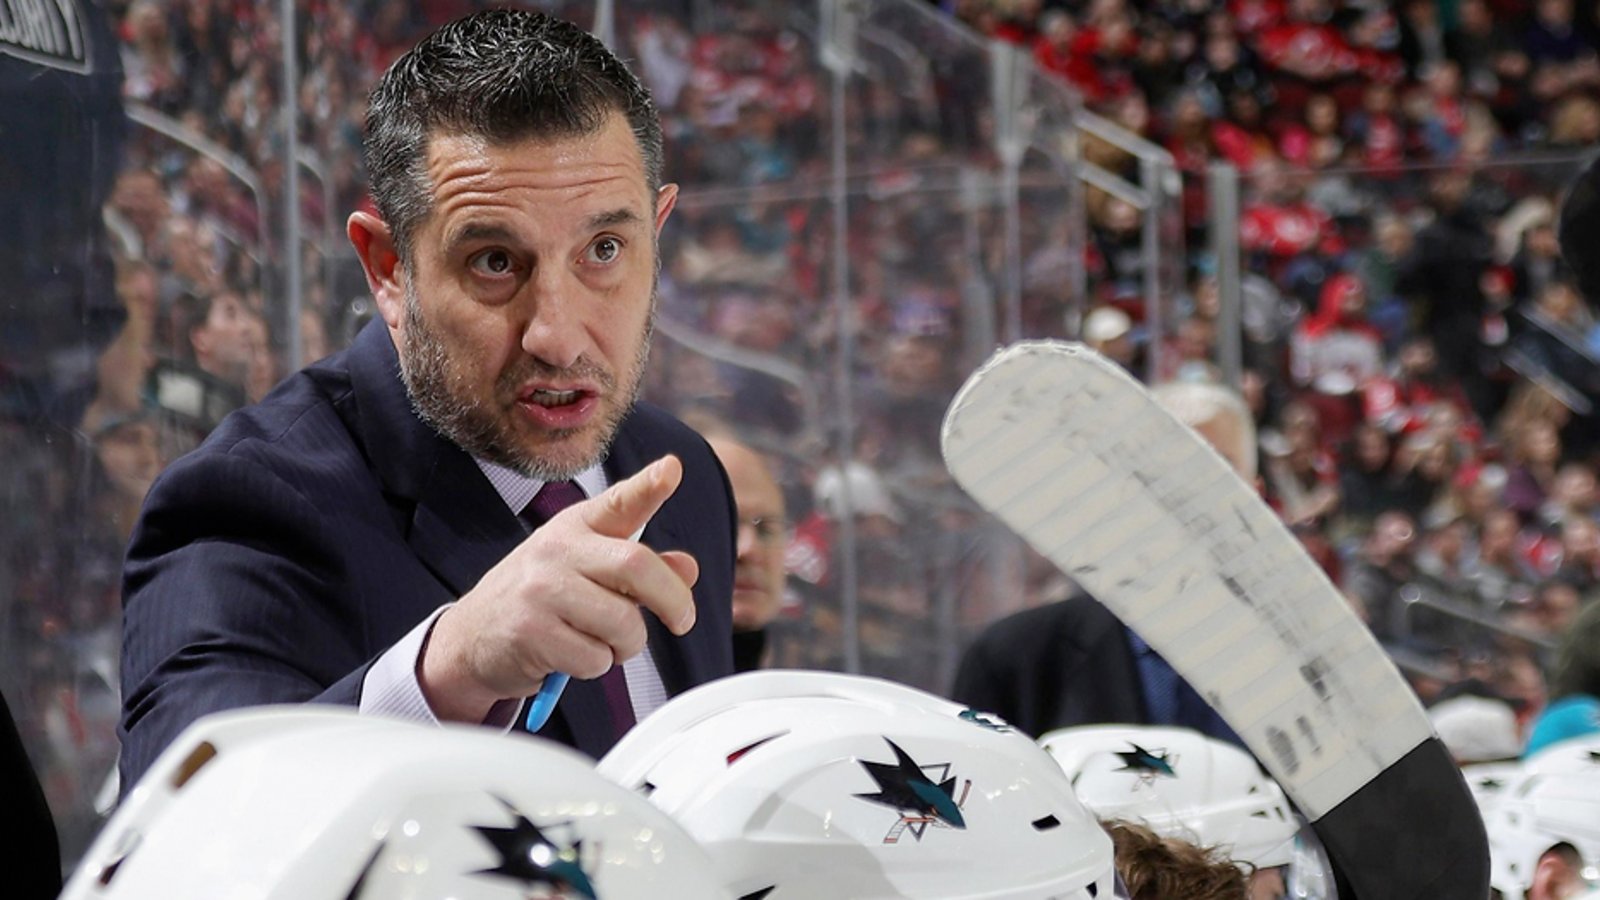 Report: Sharks seeking replacement for Boughner as head coach